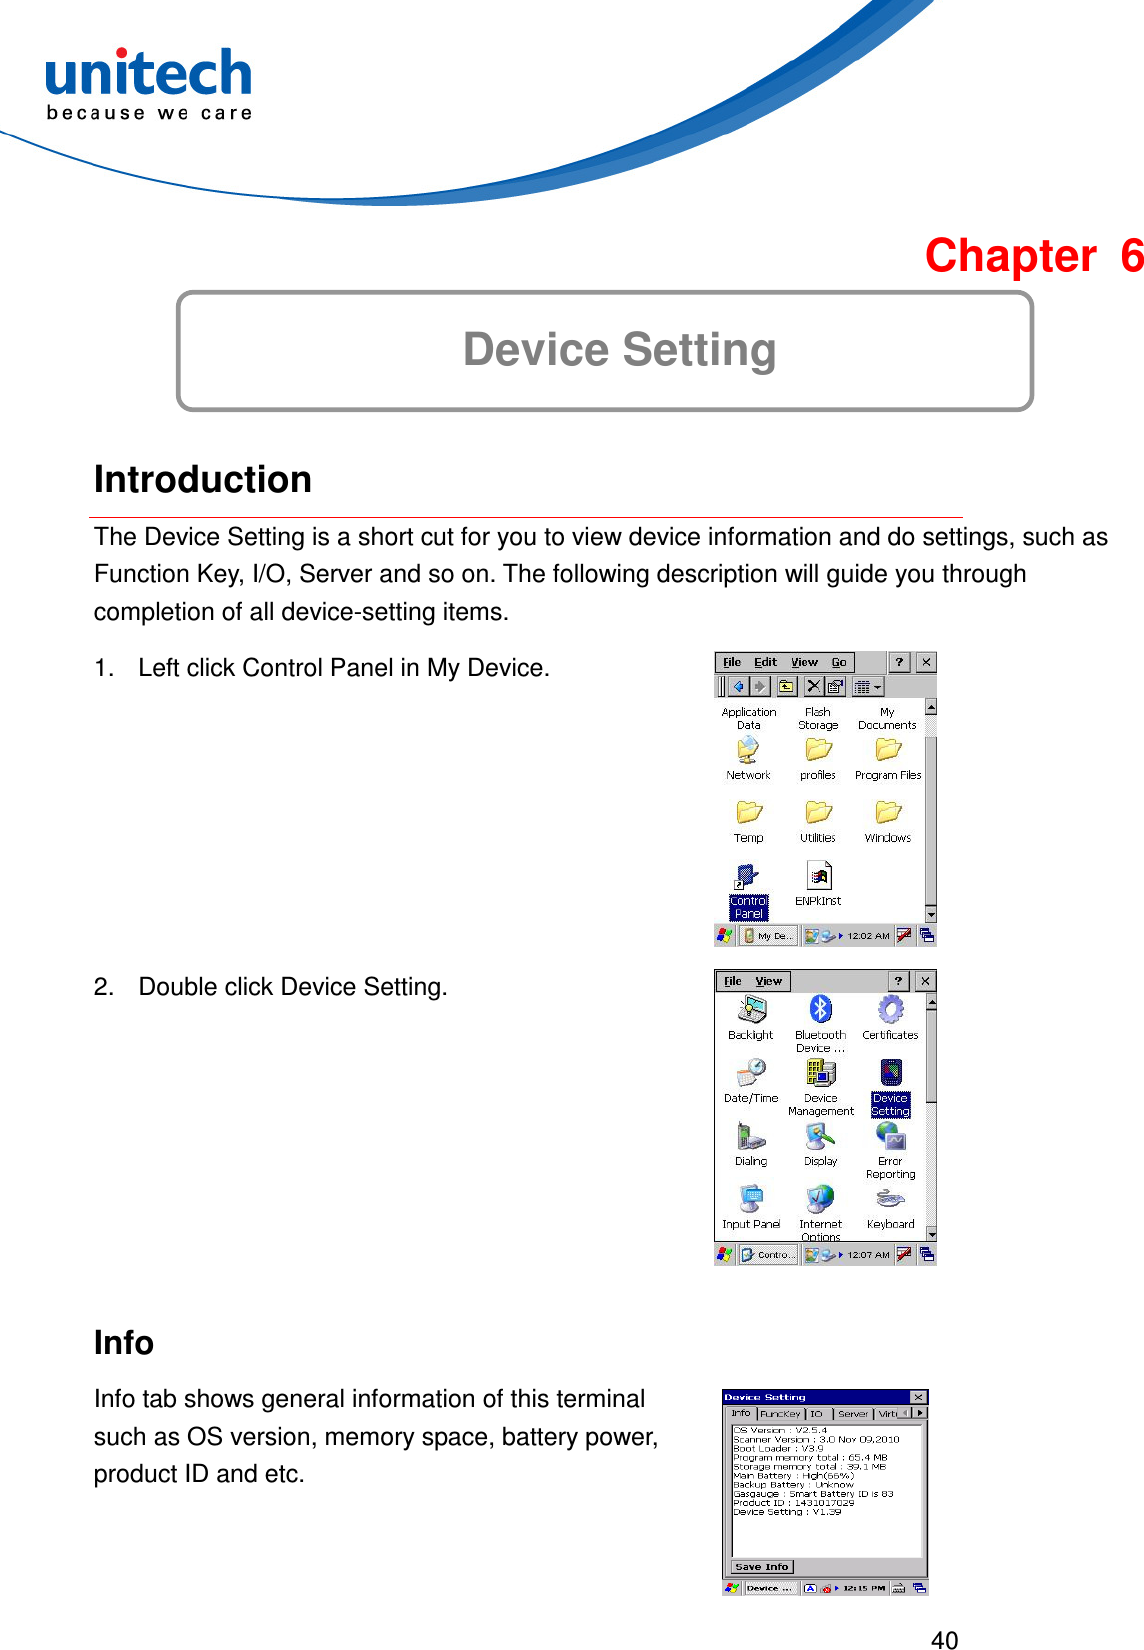  40   Chapter 6 Device Setting  Introduction The Device Setting is a short cut for you to view device information and do settings, such as Function Key, I/O, Server and so on. The following description will guide you through completion of all device-setting items.     1.  Left click Control Panel in My Device.  2.  Double click Device Setting.  Info Info tab shows general information of this terminal such as OS version, memory space, battery power, product ID and etc.  